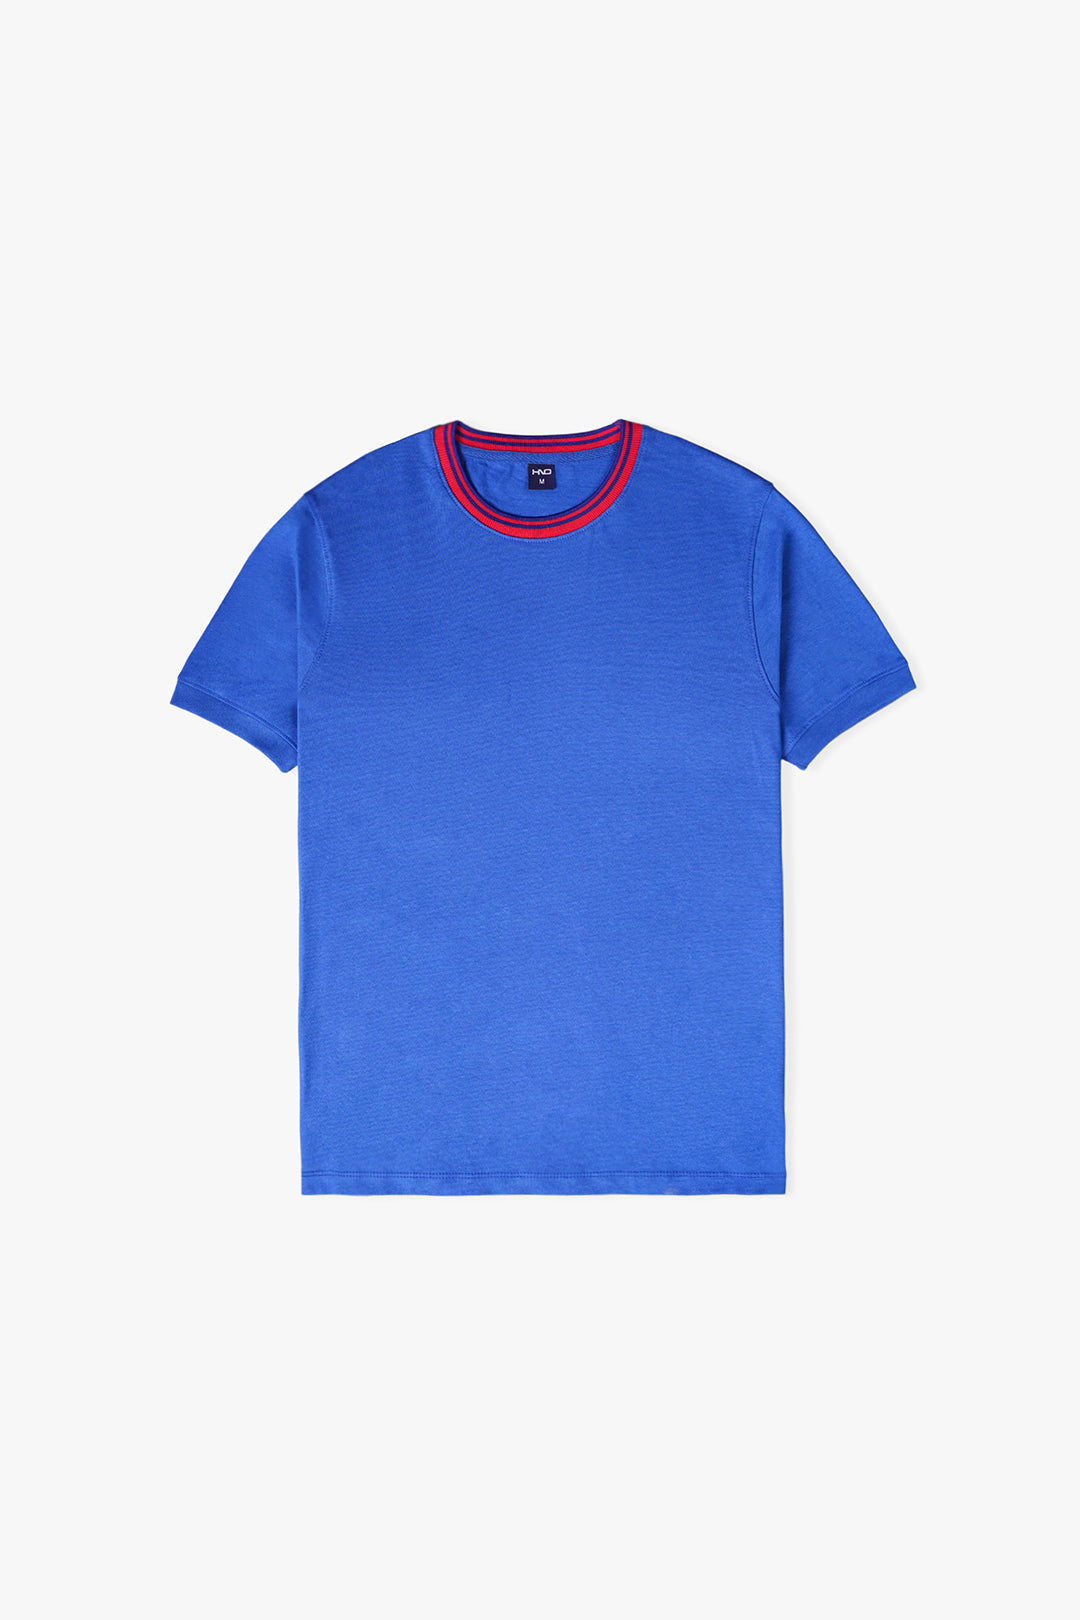 Men's Tee With Tipped Neck And Sleeves